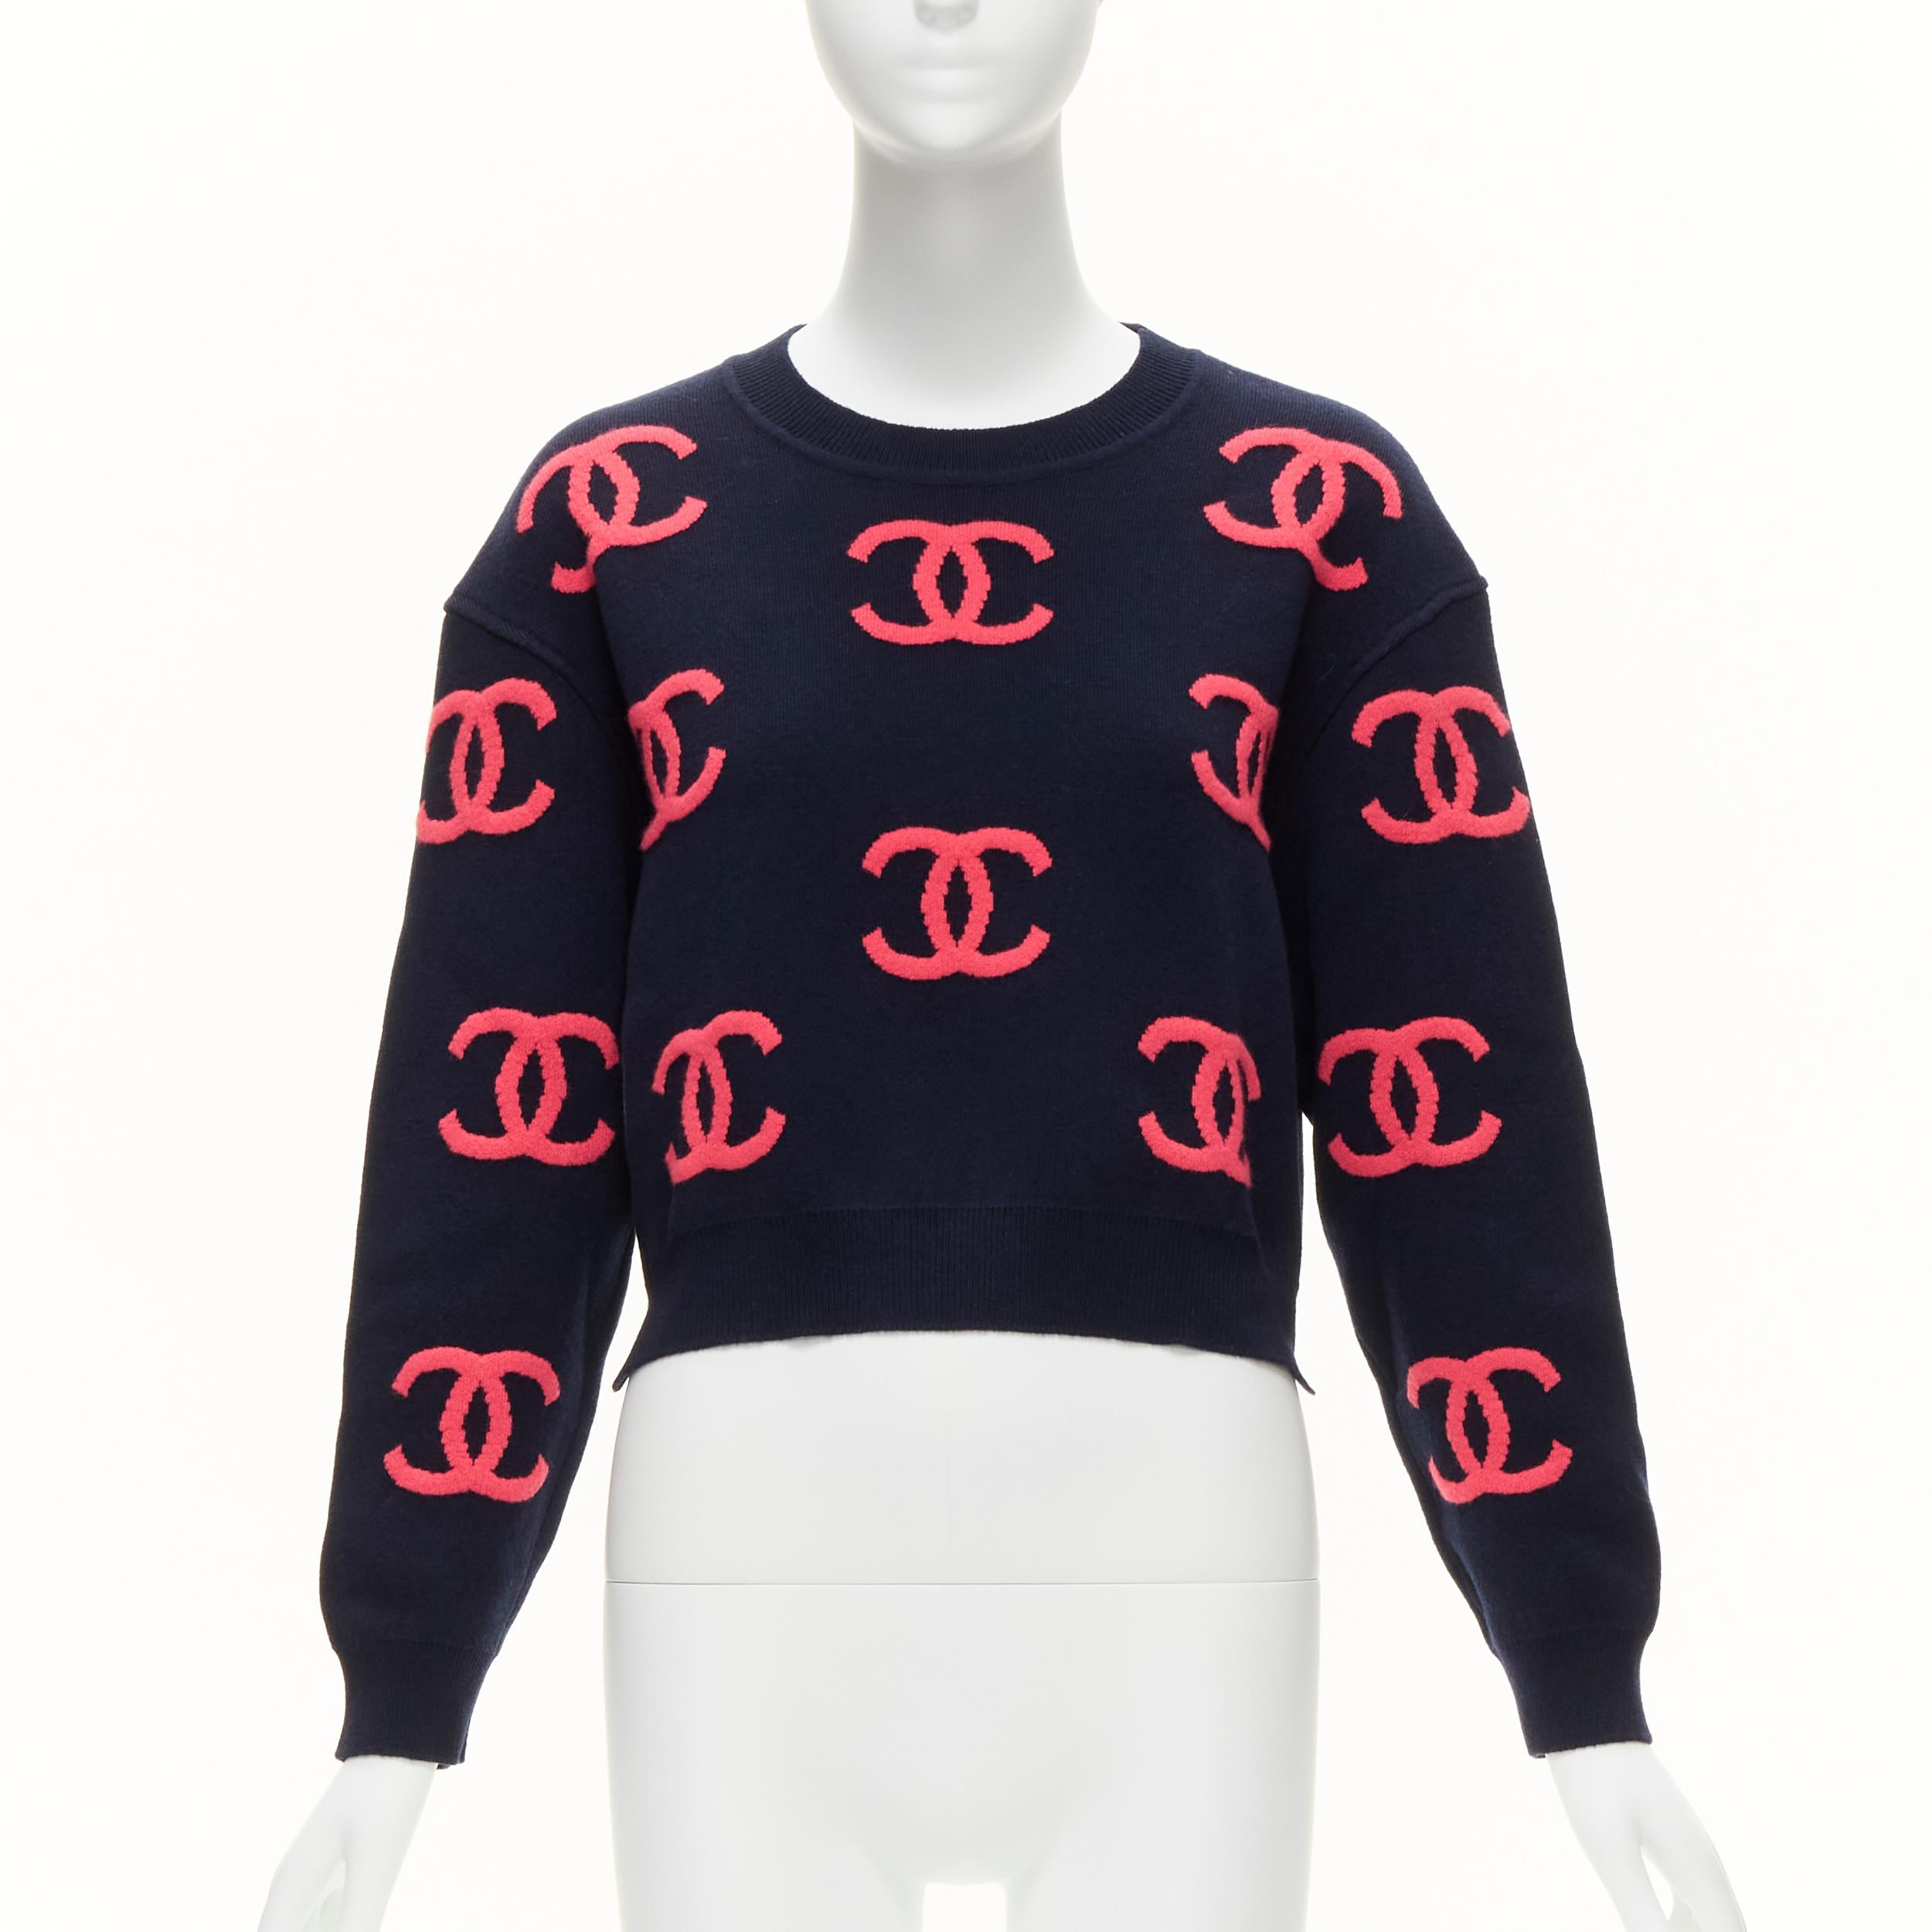 CHANEL, Sweaters, Chanel Cc Logo Vneck Cashmere Sweater